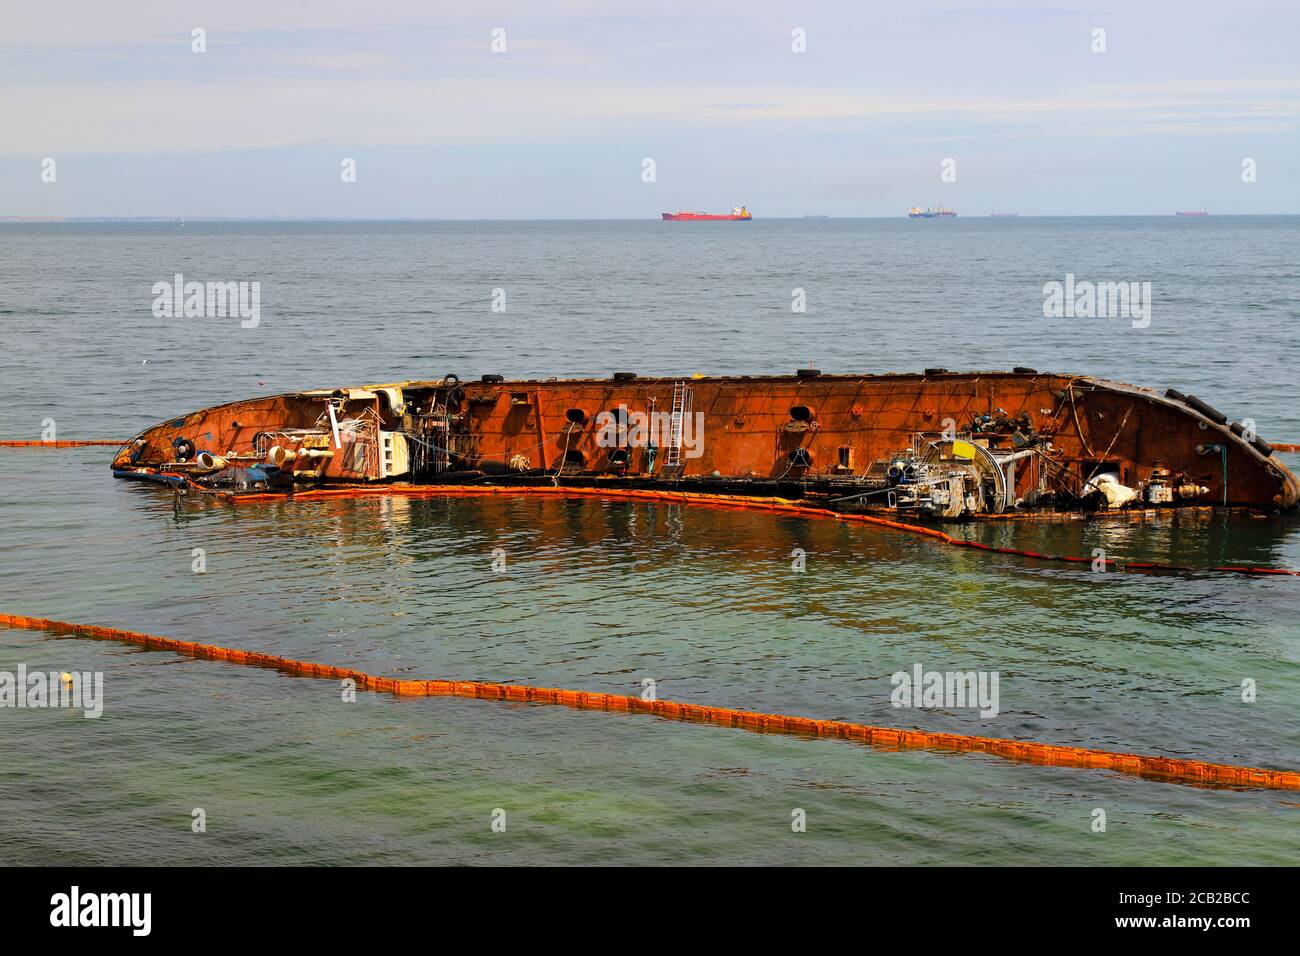 An old rusty tanker flooded and lies near the coast in Odessa, Ukraine. Oil spills from the ship and pollutes the sea water. Environmental pollution Stock Photo